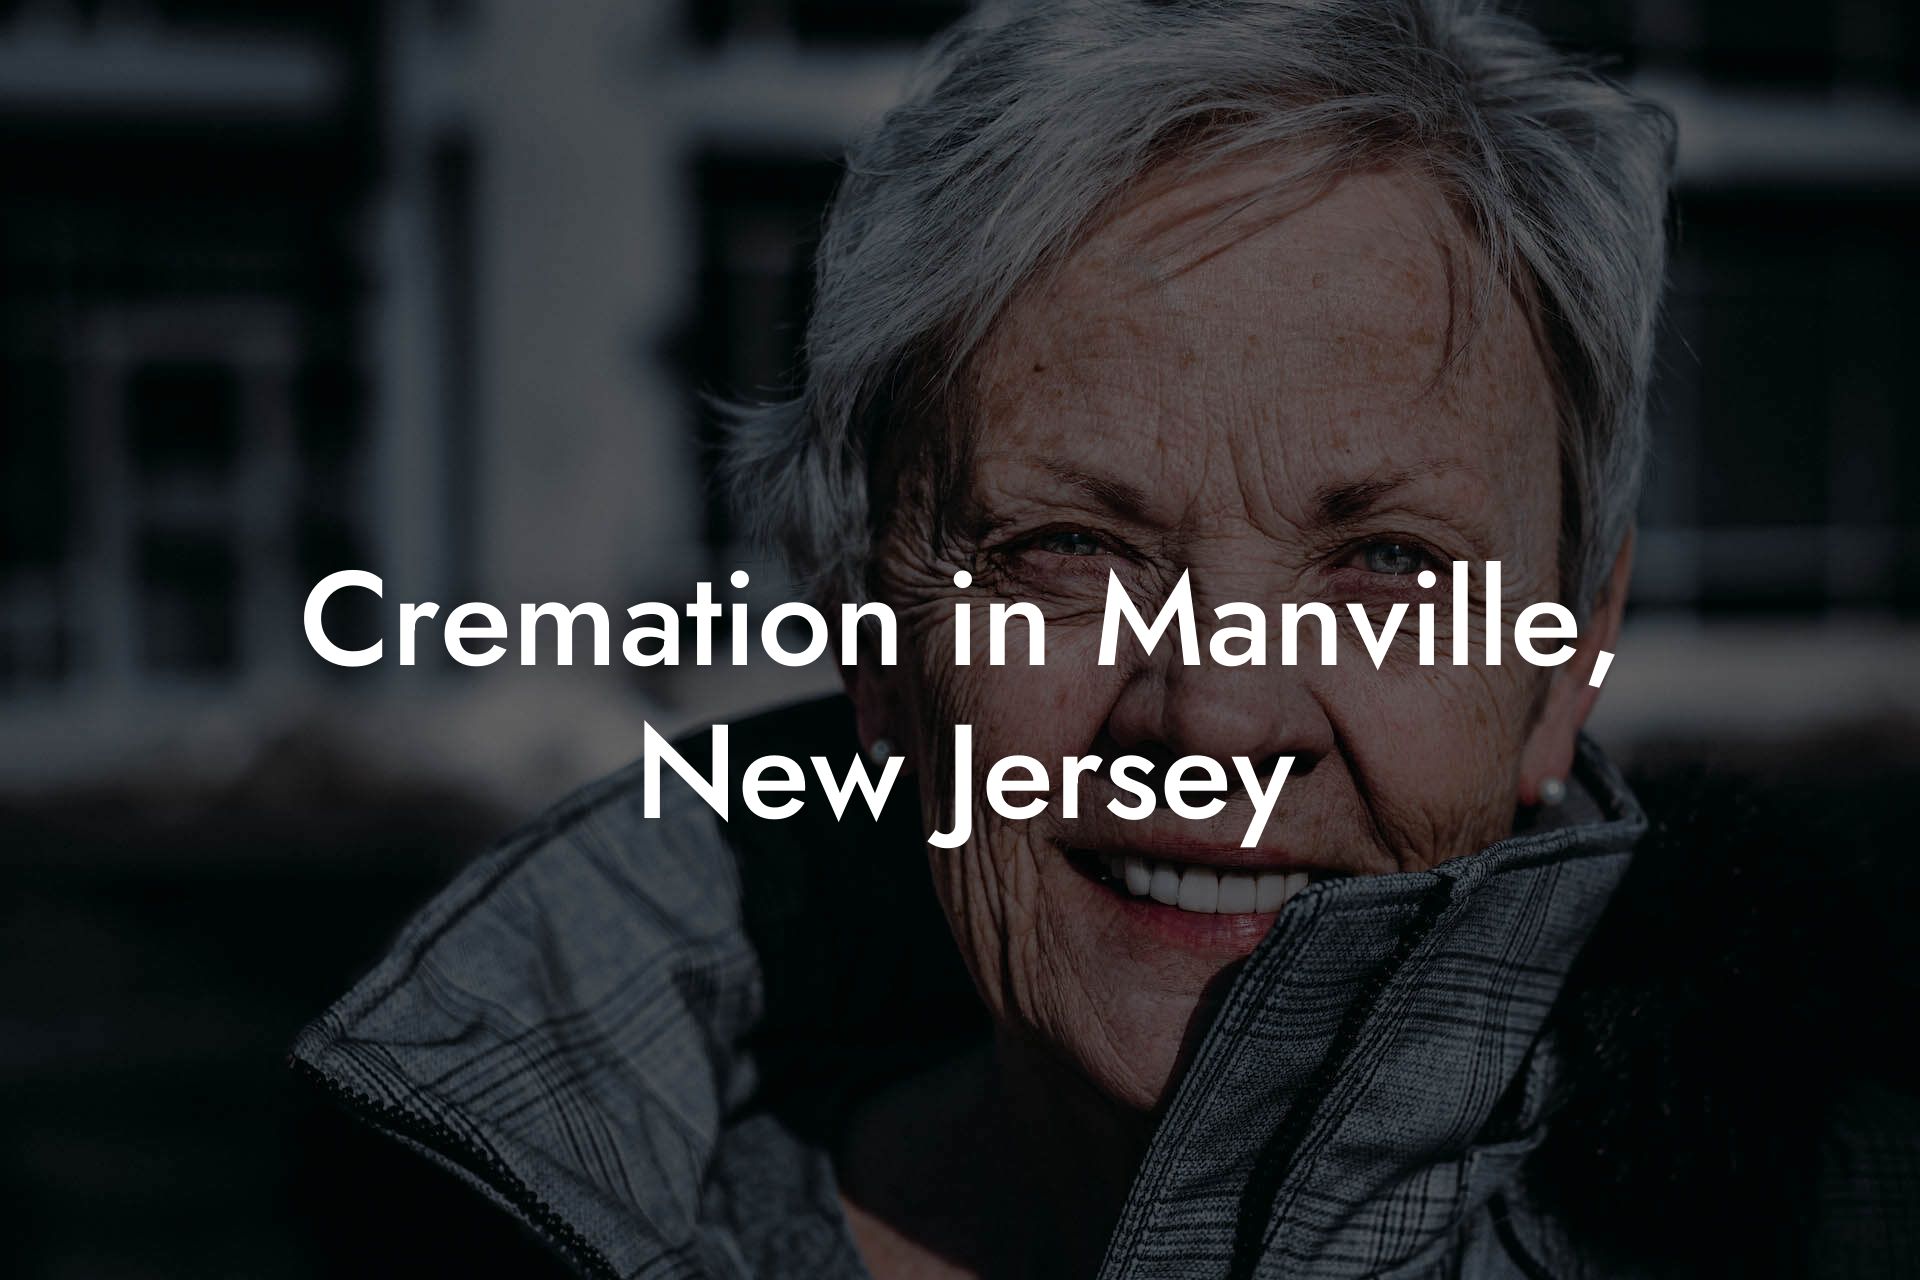 Cremation in Manville, New Jersey